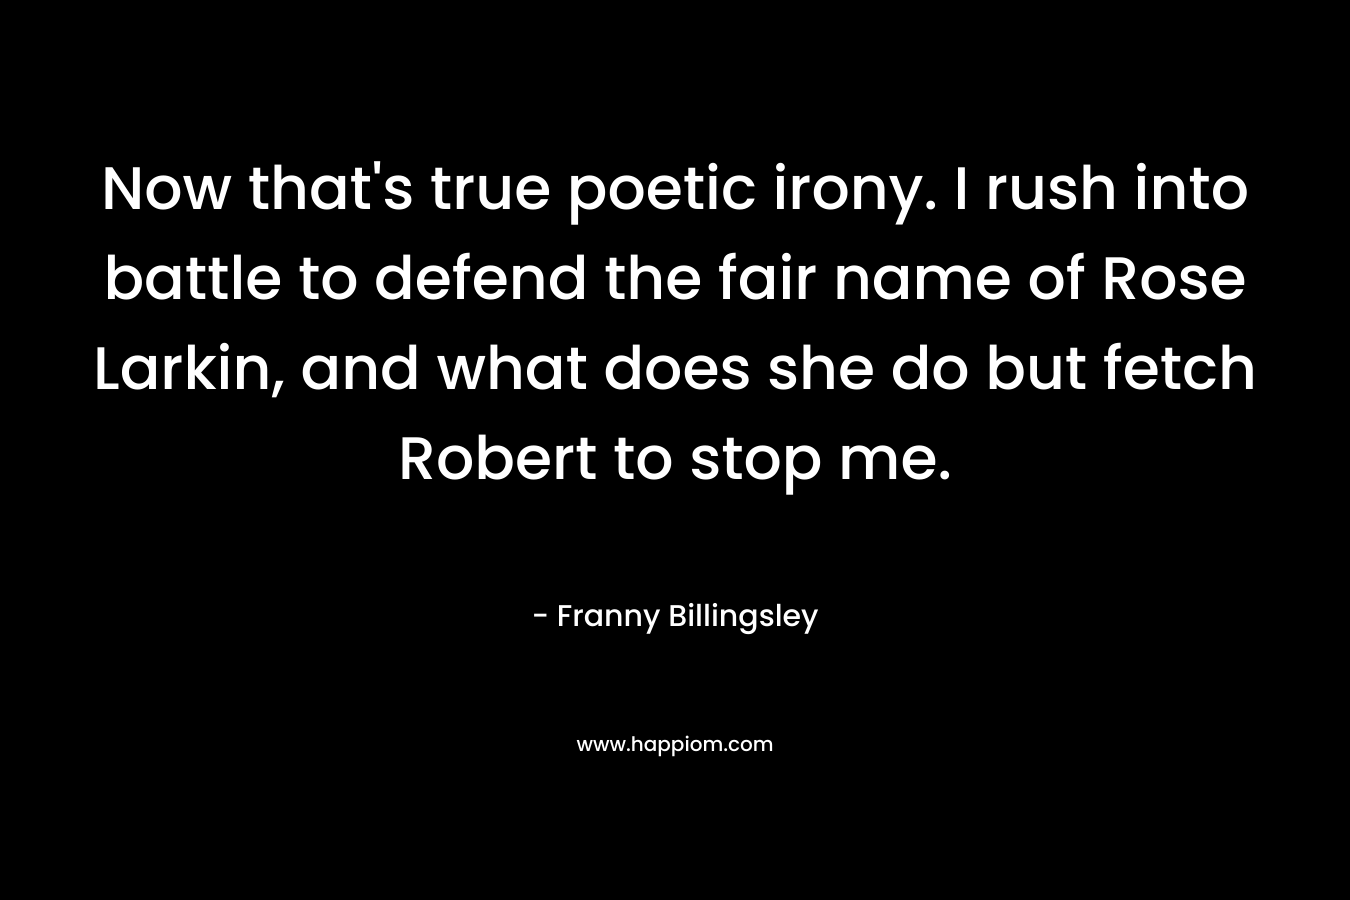 Now that’s true poetic irony. I rush into battle to defend the fair name of Rose Larkin, and what does she do but fetch Robert to stop me. – Franny Billingsley